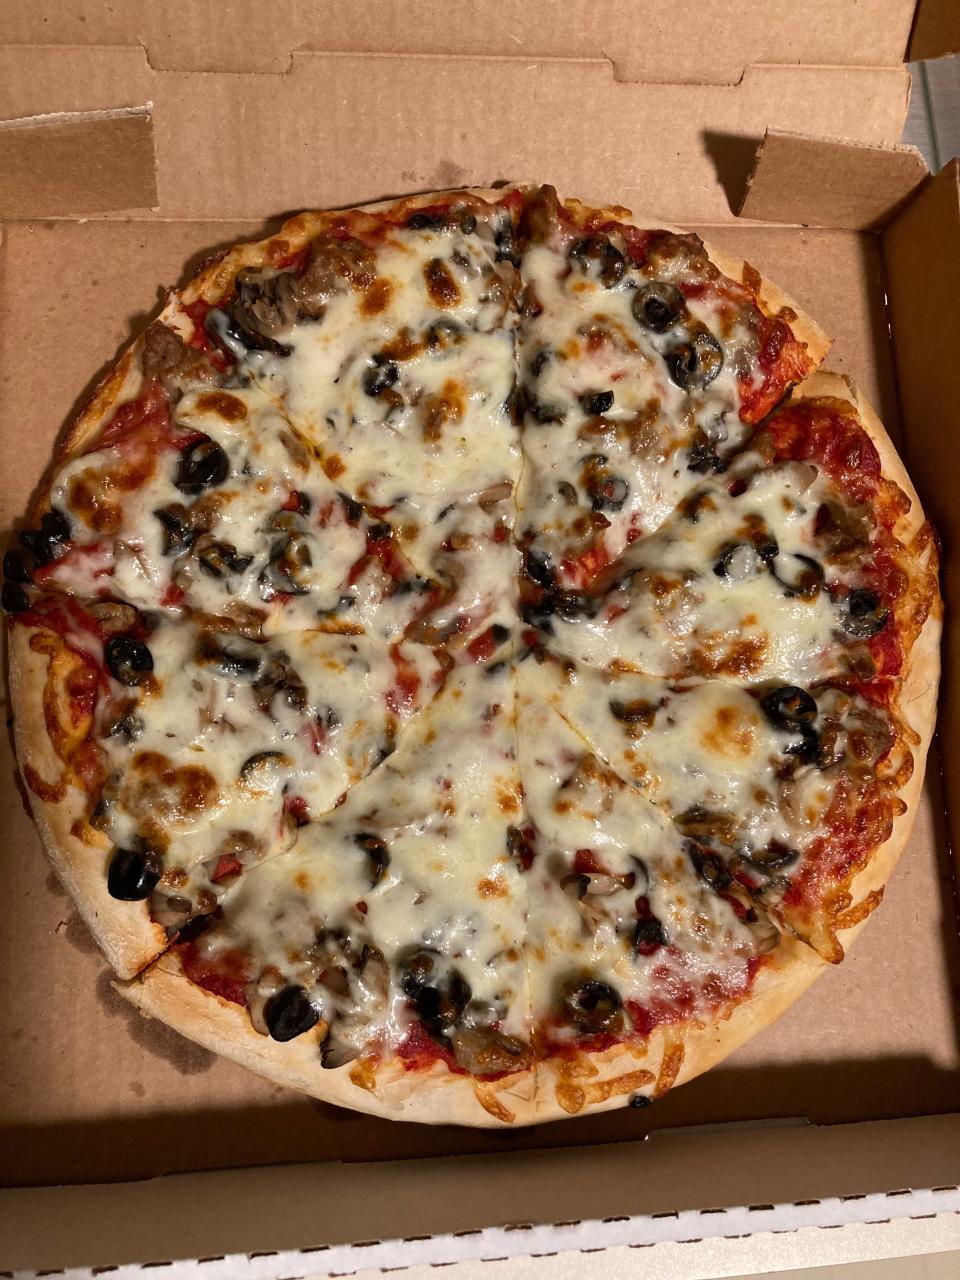 Altieri’s Pizza in Stow serves a 12-inch pizza topped with mushrooms, sausage and black olives.